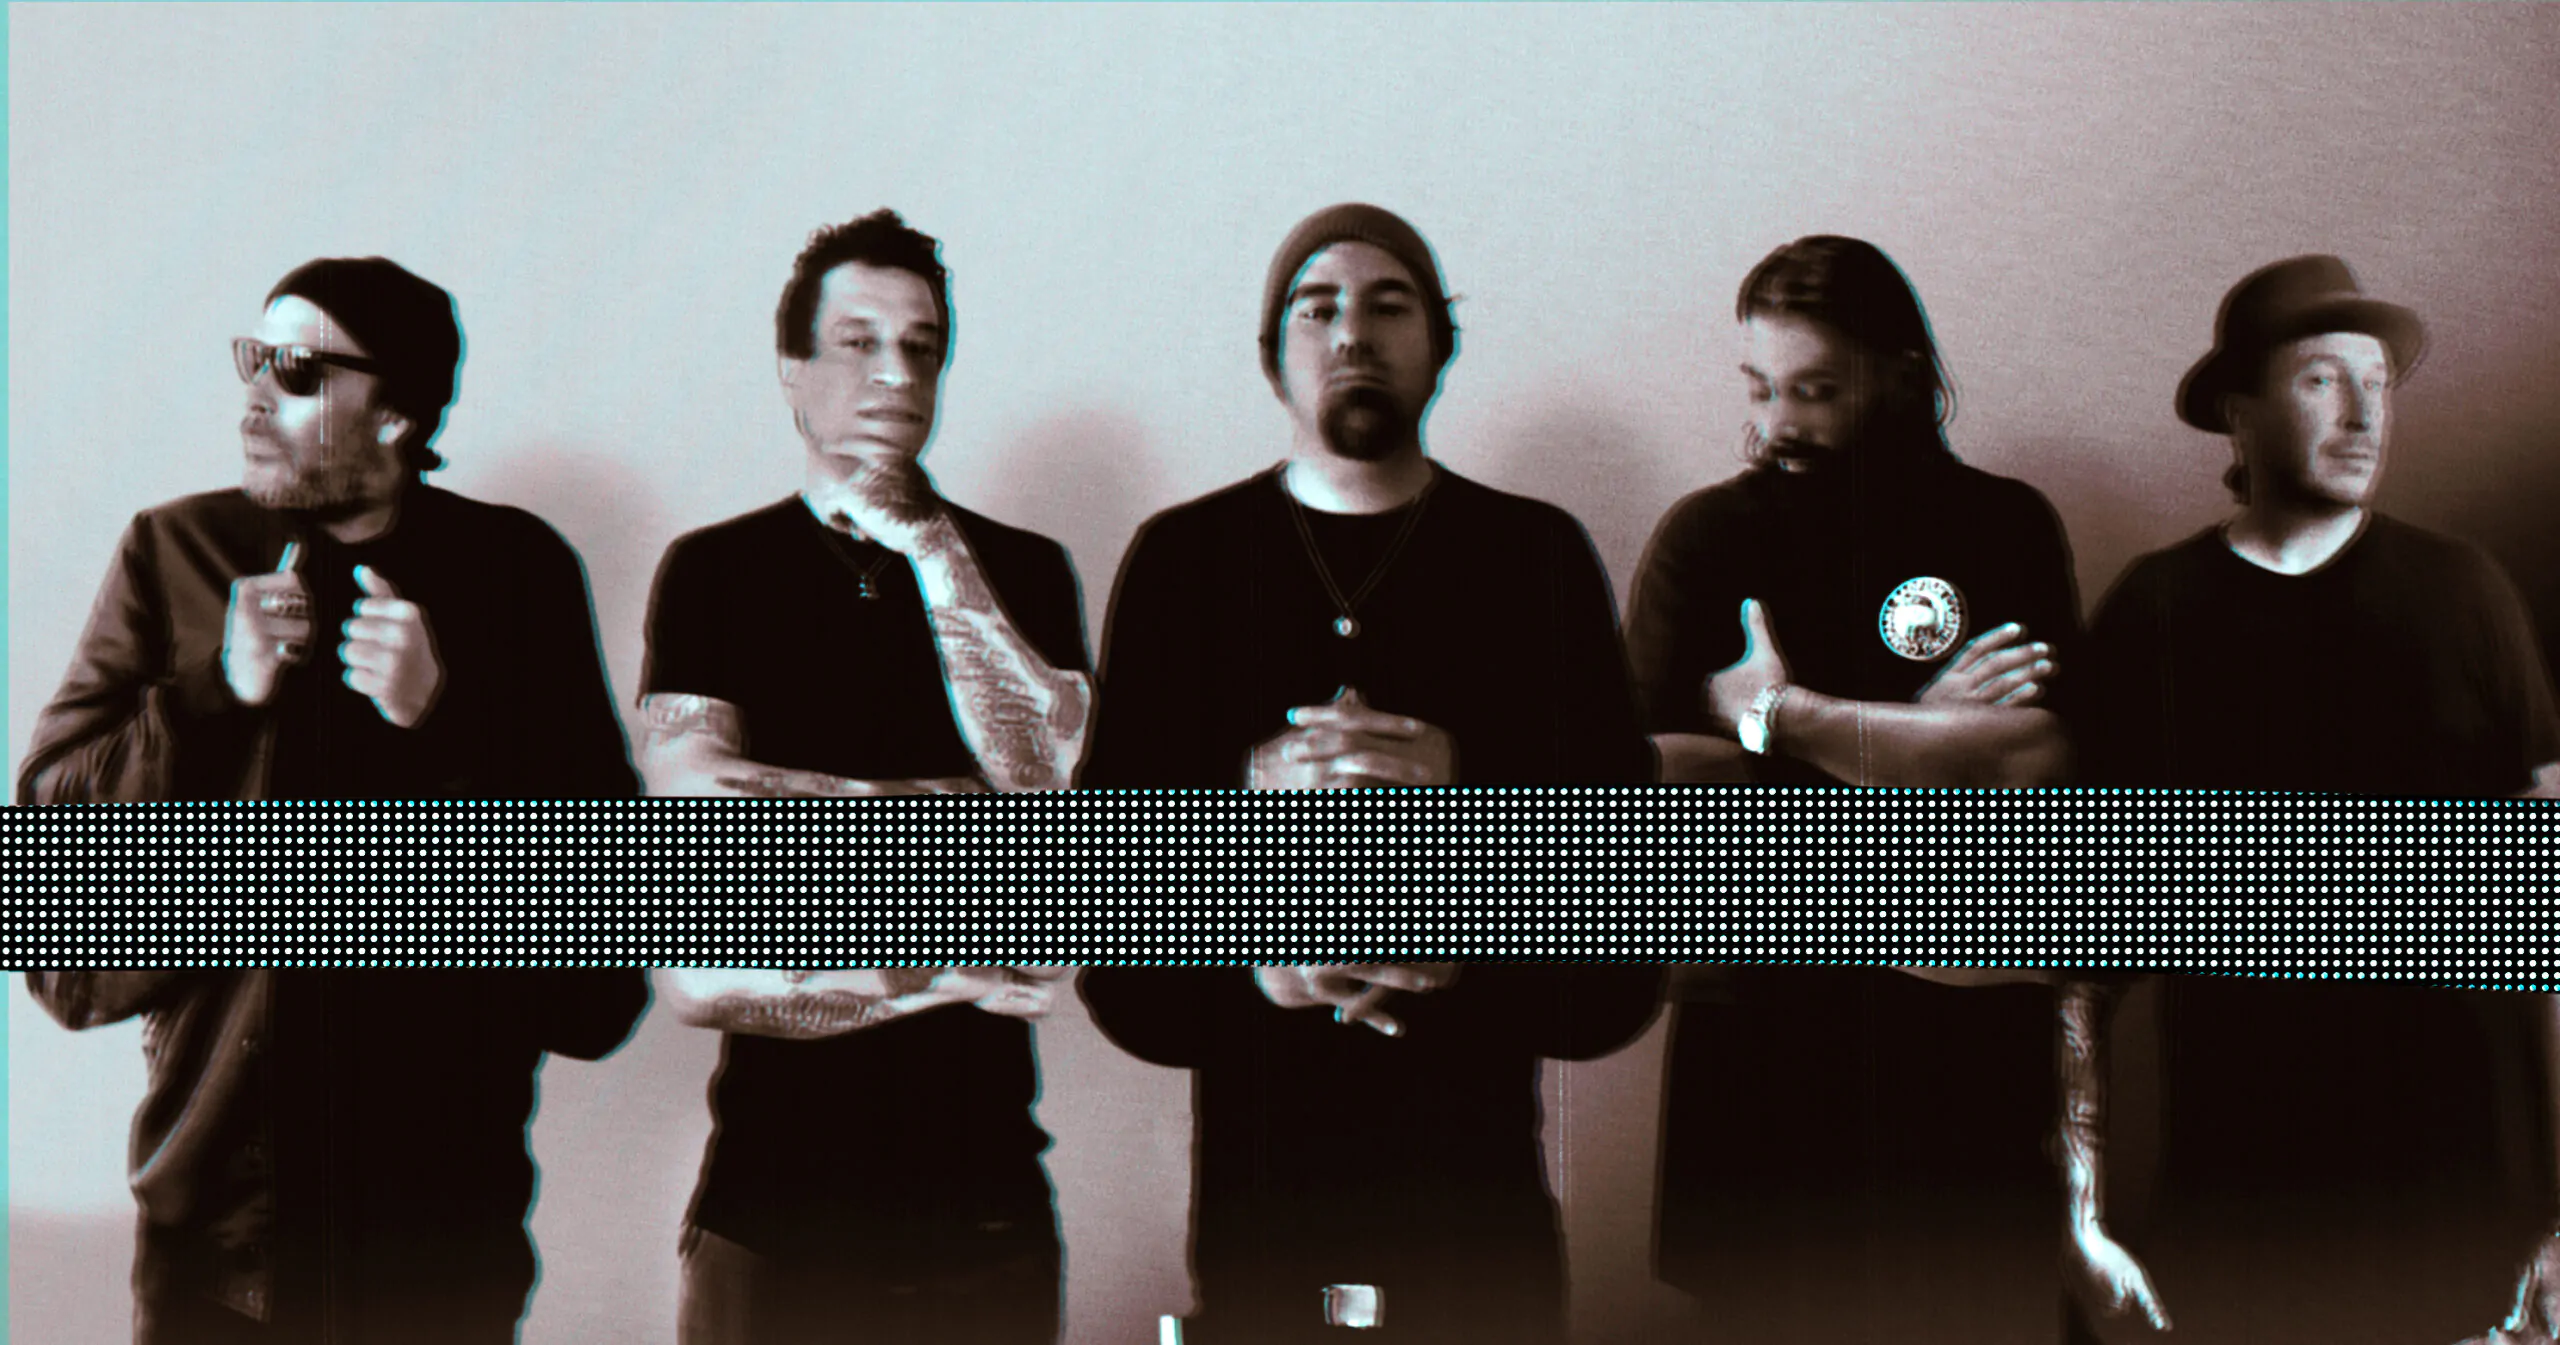 DEFTONES release video for ‘Genesis’ taken from the new album ‘Ohms’ out September 25th